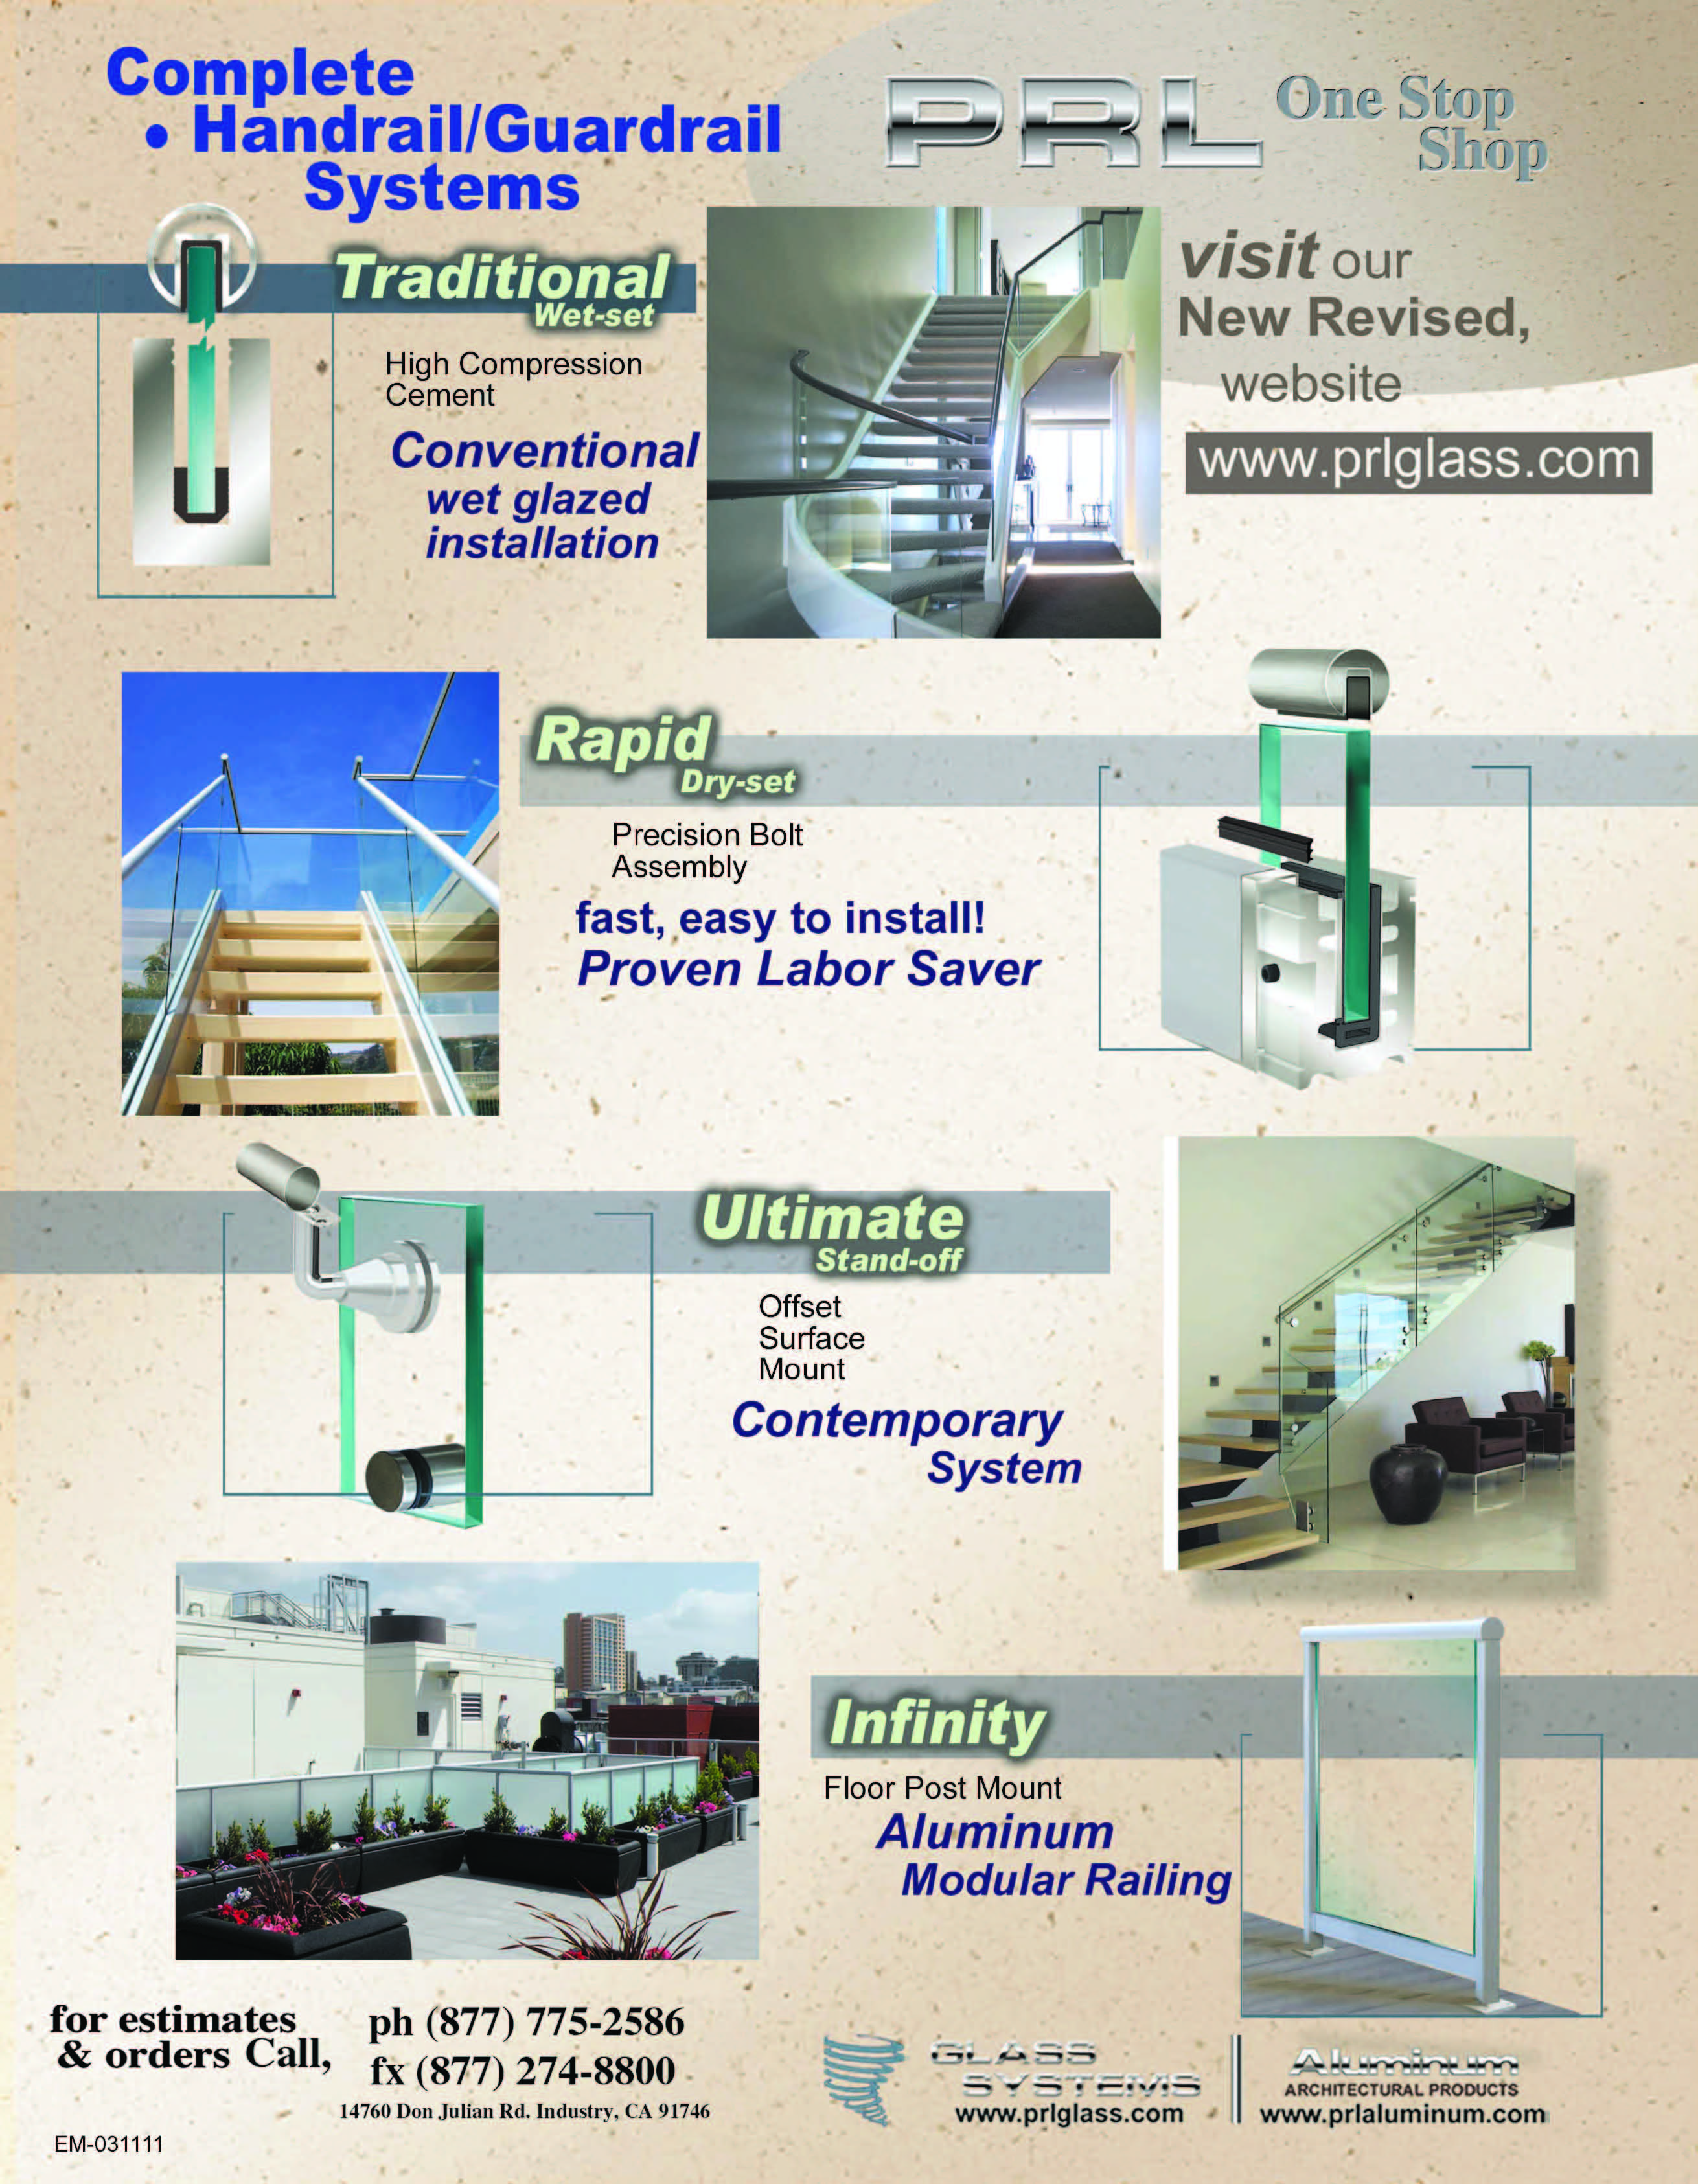 Complete Handrail and Guardrail Systems